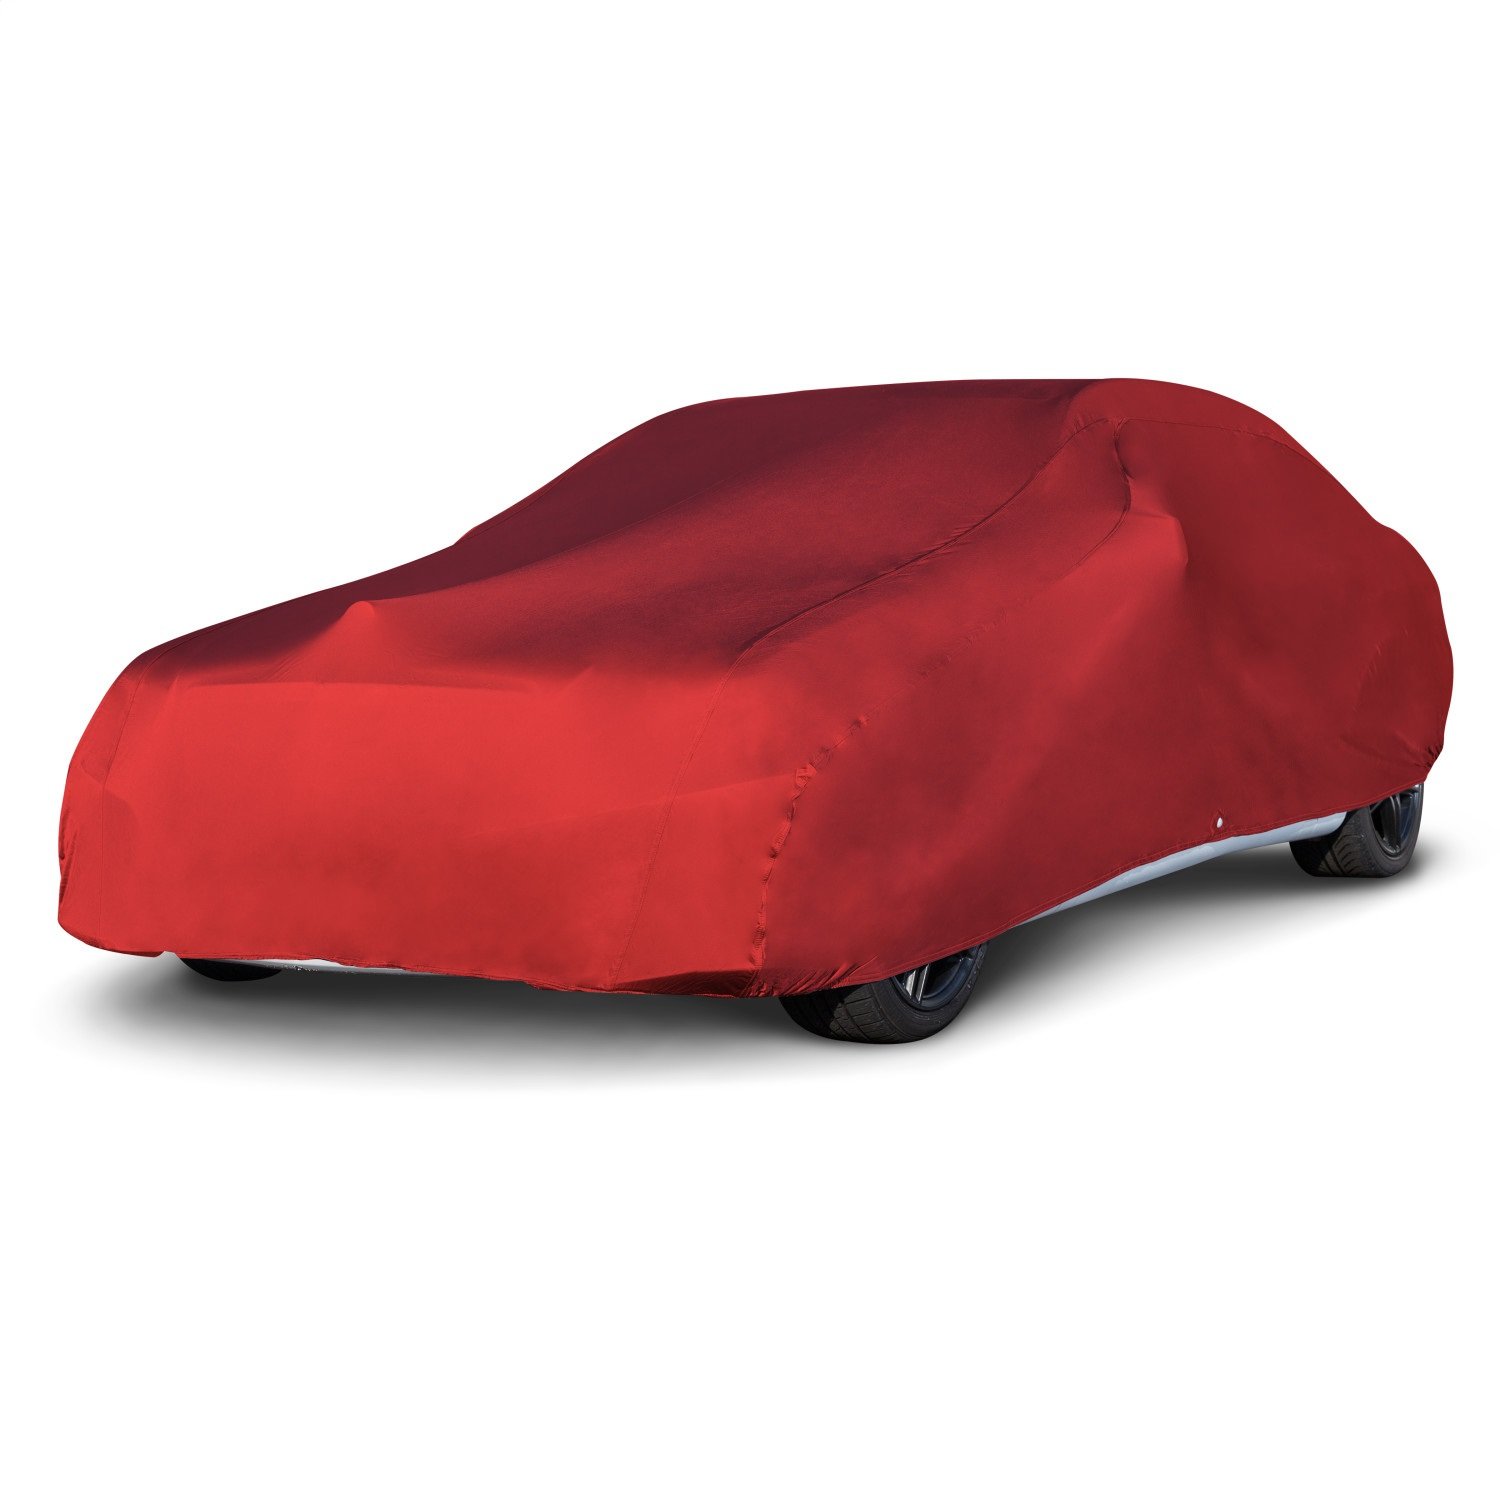 Budge RSC-3 Indoor Stretch Car Cover, Luxury Indoor Protection, Soft Inner Lining, Breathable, Dustproof, Car Cover fits Cars up to 200", Red, Size 3: Fits up to 16'8" von Budge